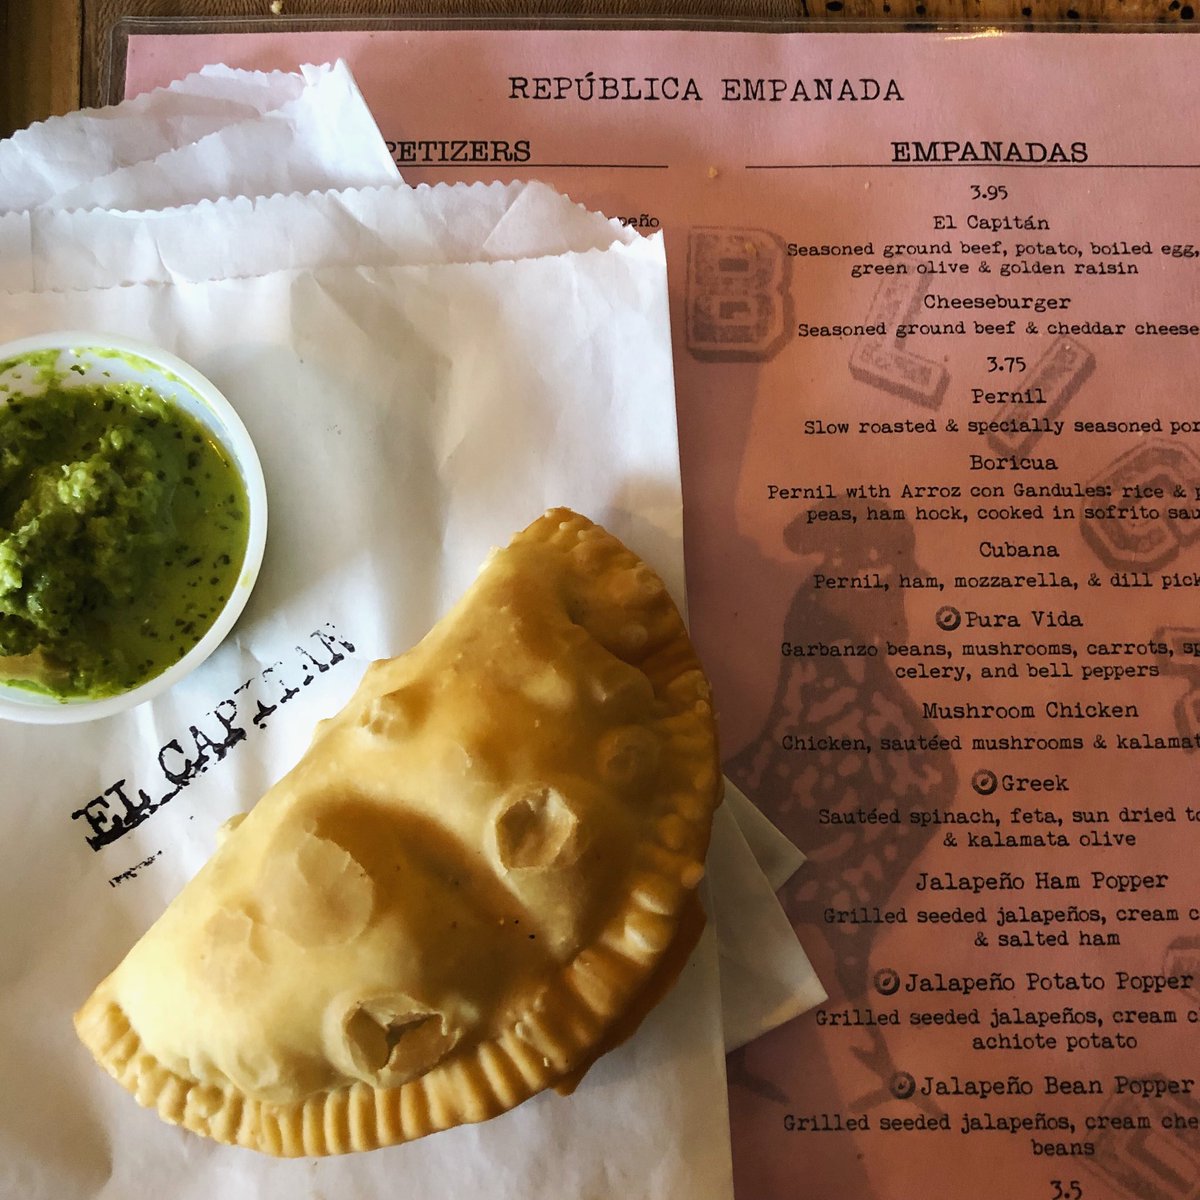 If you’re ever in Mesa, AZ you gotta eat at #republicaempanada ~  the food is amazing and the service friendly! We ❤️ this place!